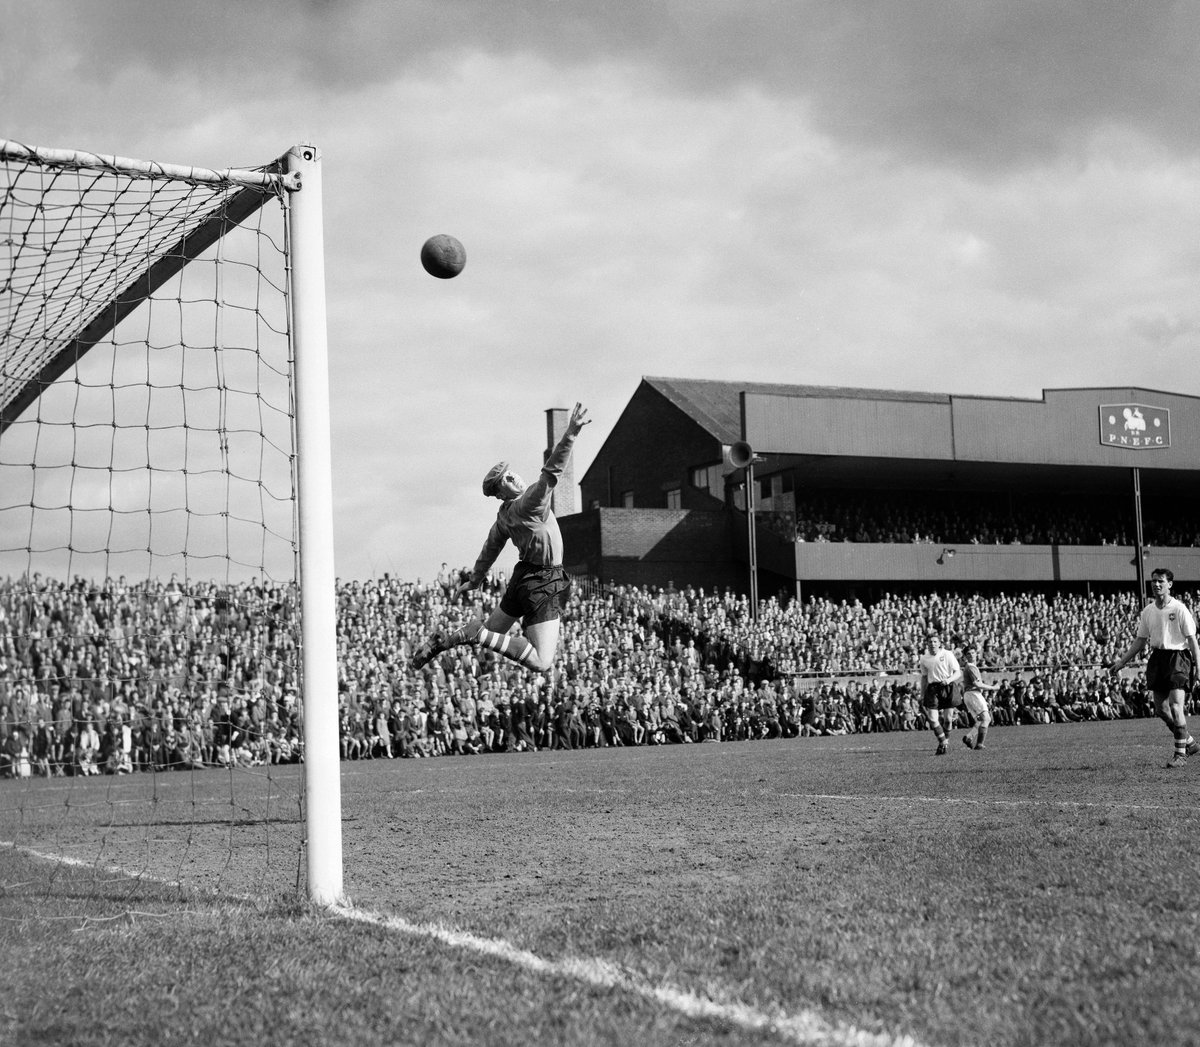 Preston North End goalkeeper Fred Else attempts to save a shot during the Football League Division One match between Preston North End and Blackpool. (Photo by W & H Talbot/Popperfoto via Getty Images) 

buff.ly/3UlRqht 

#vintagefootball #caferoyalbooks #popperfoto